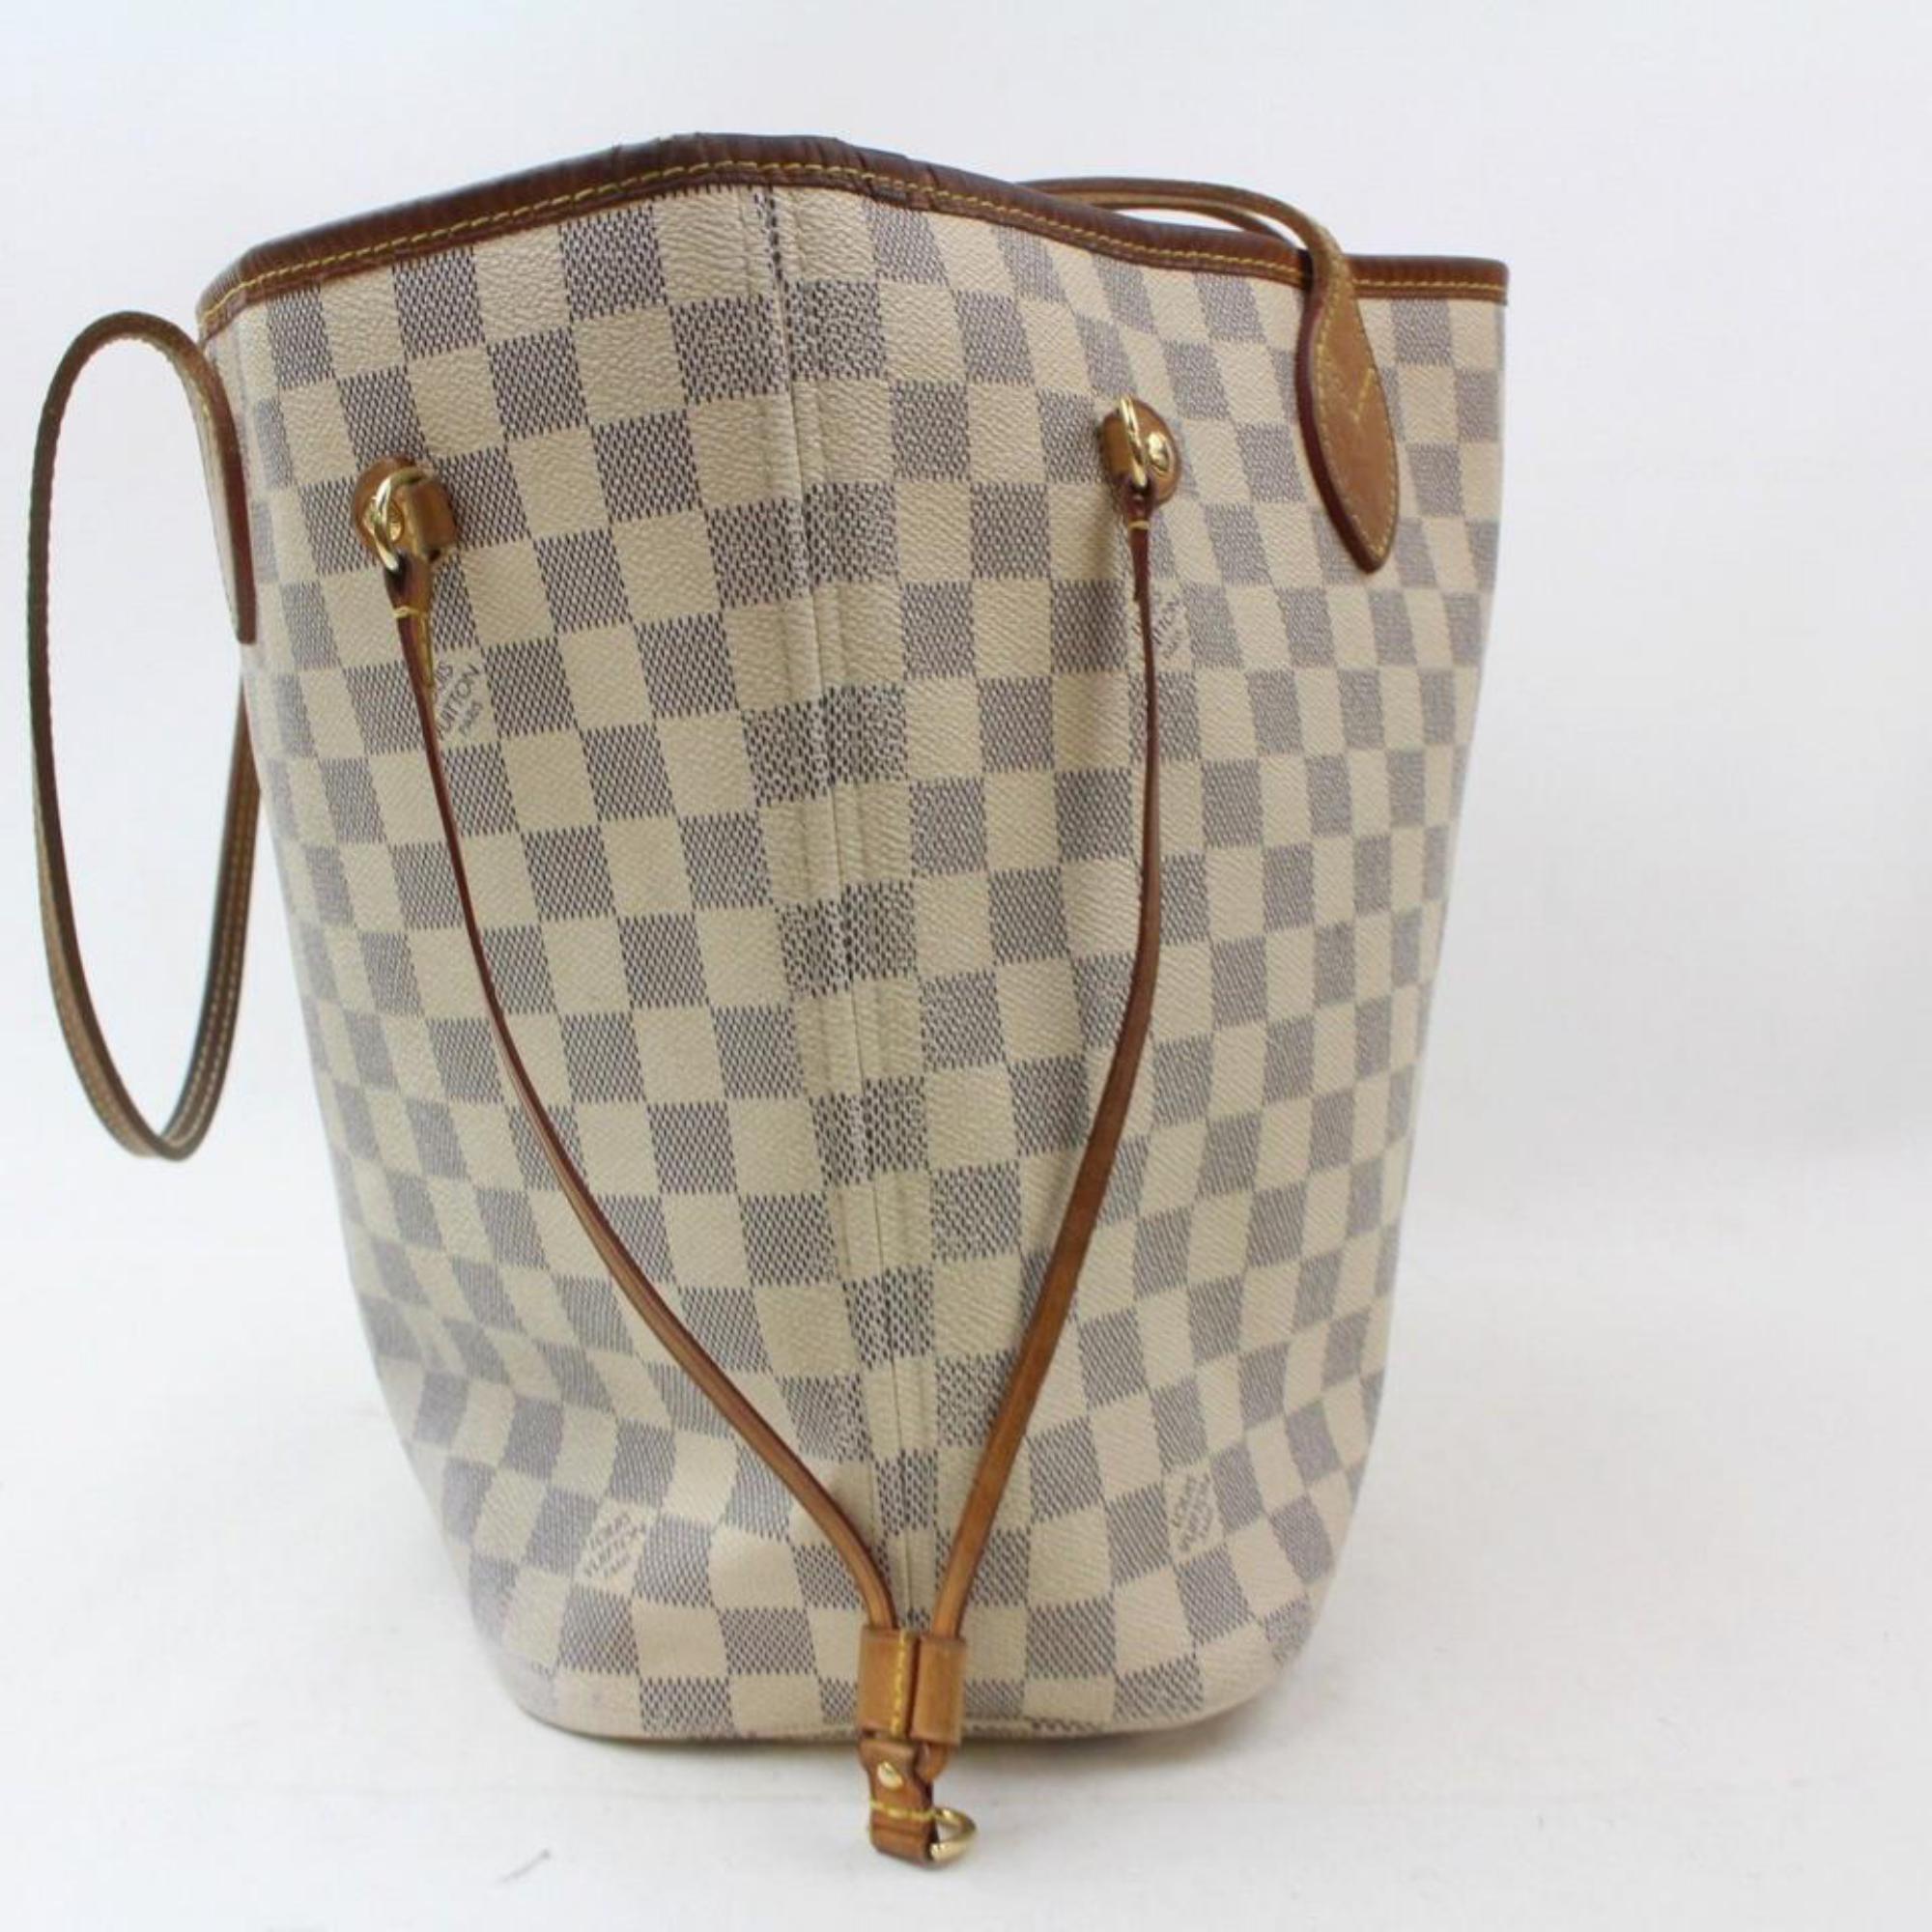 Louis Vuitton Neverfull Damier Azur Mm Everyday Shopper 868990 Canvas Tote For Sale 2